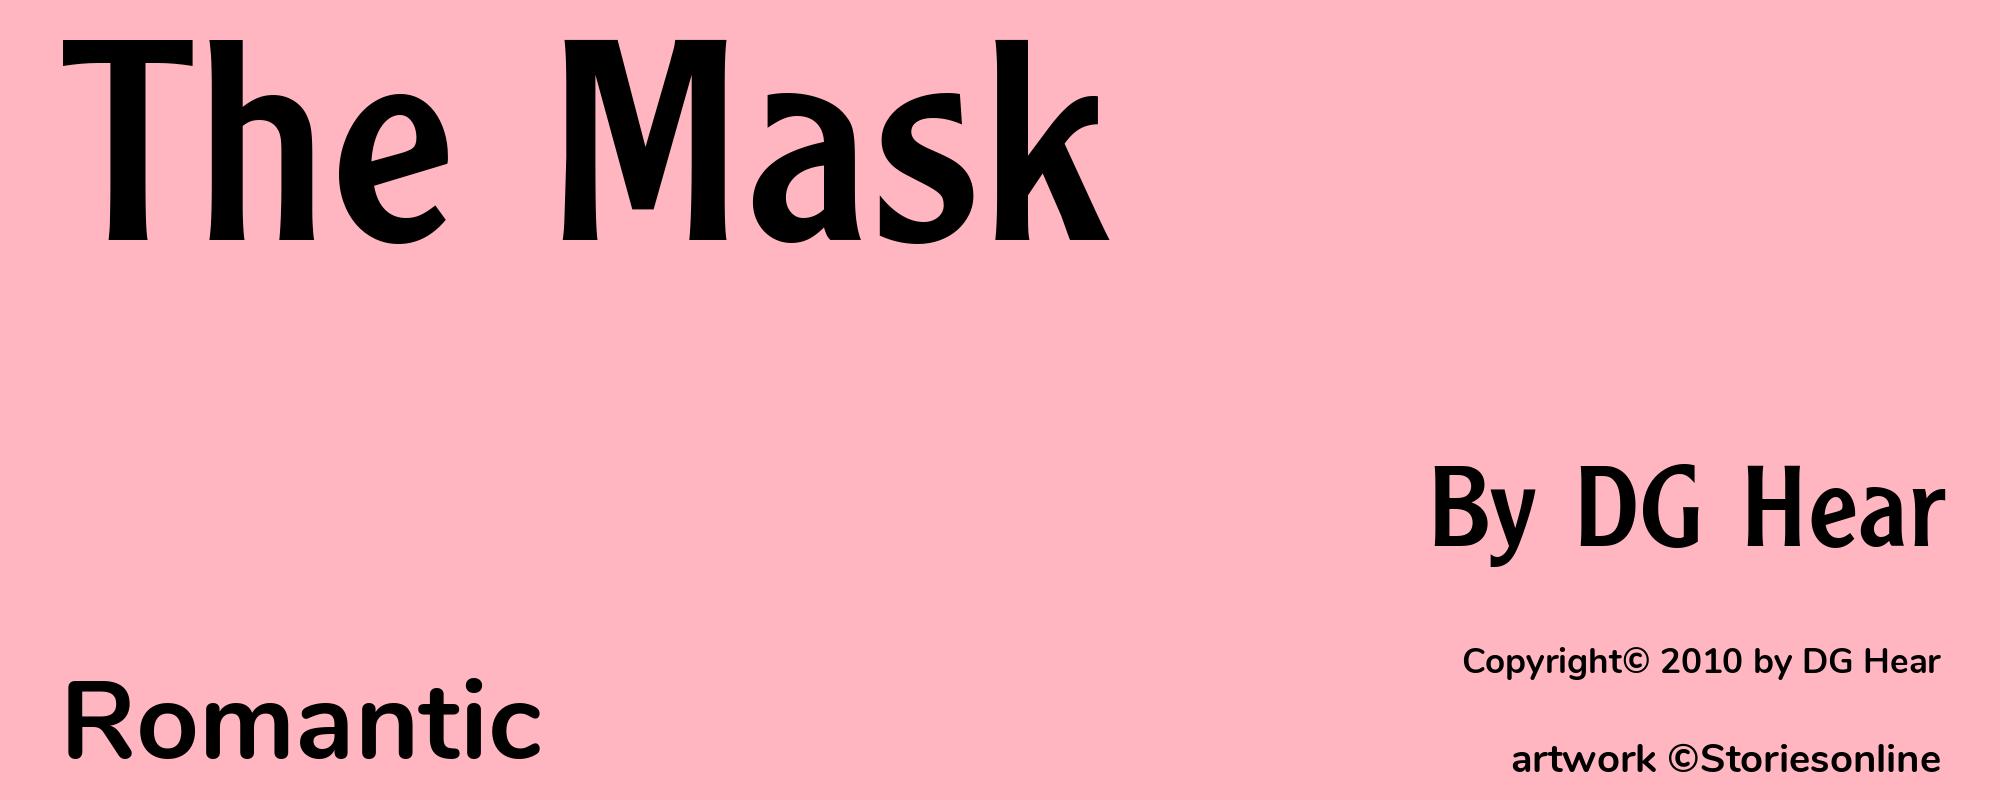 The Mask - Cover